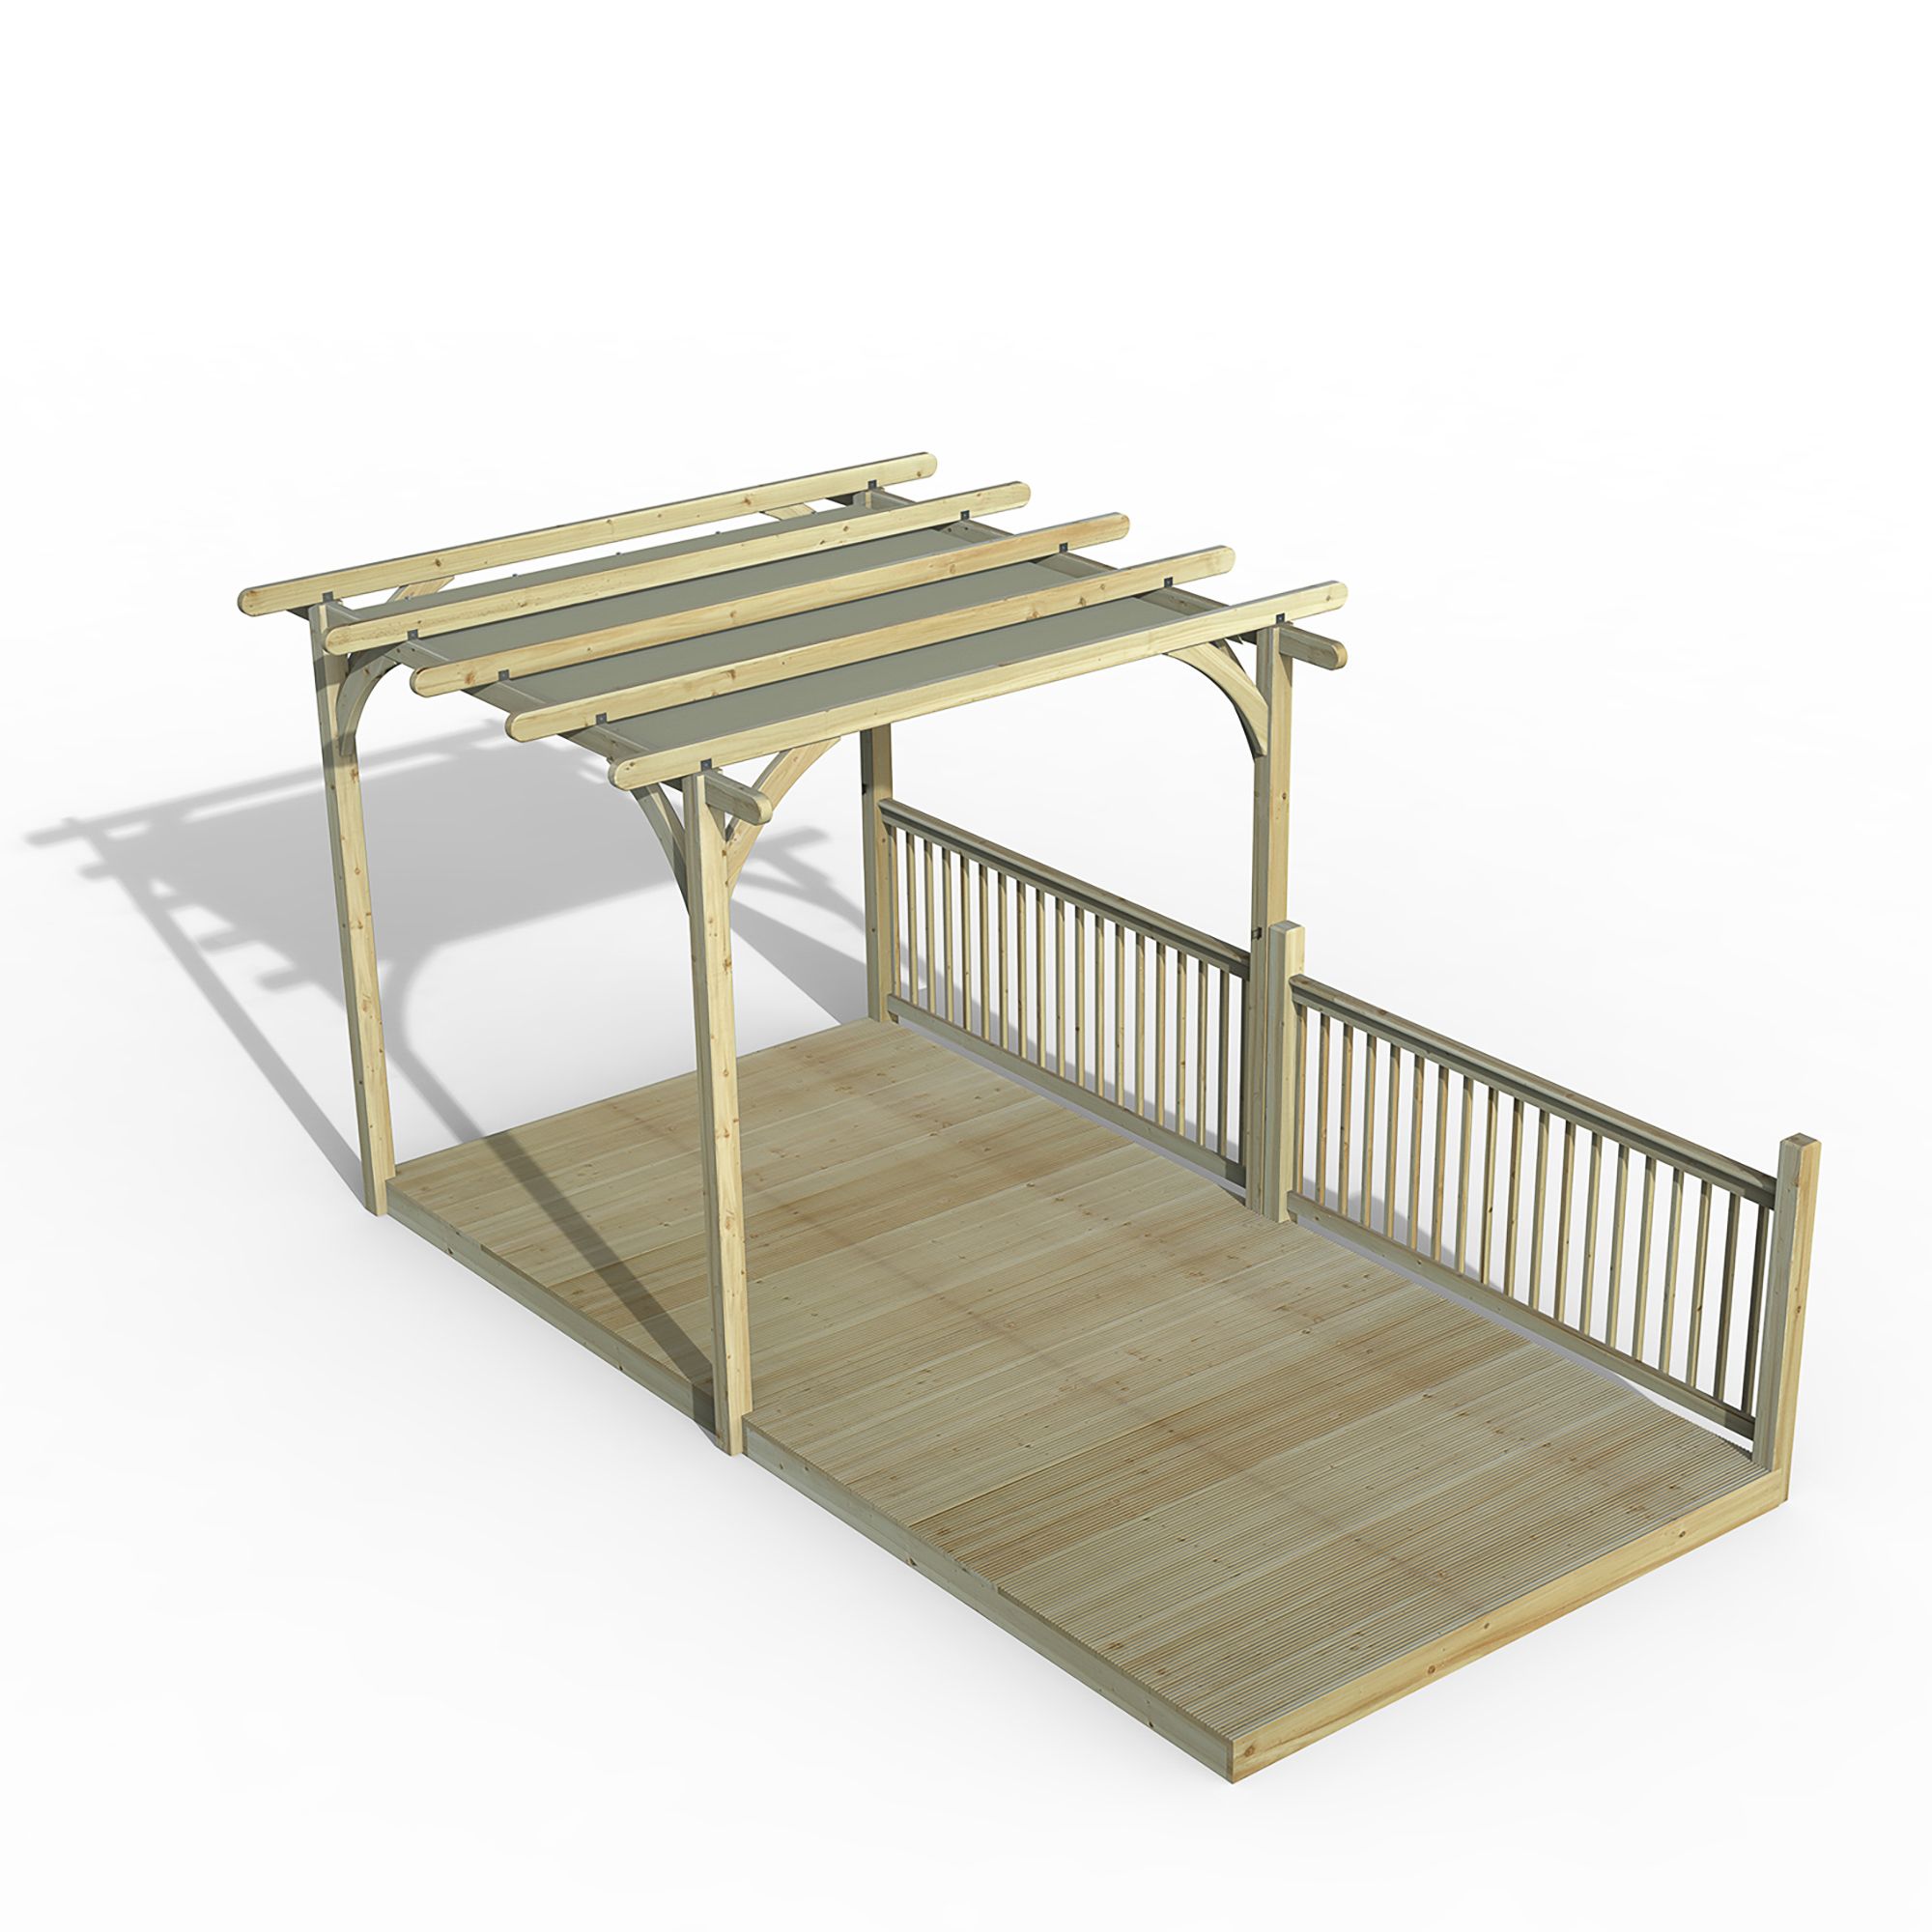 Forest Garden Grey Rectangular Pergola & decking kit, x2 Post x2 Balustrade (H) 2.5m x (W) 5.2m - Canopy included